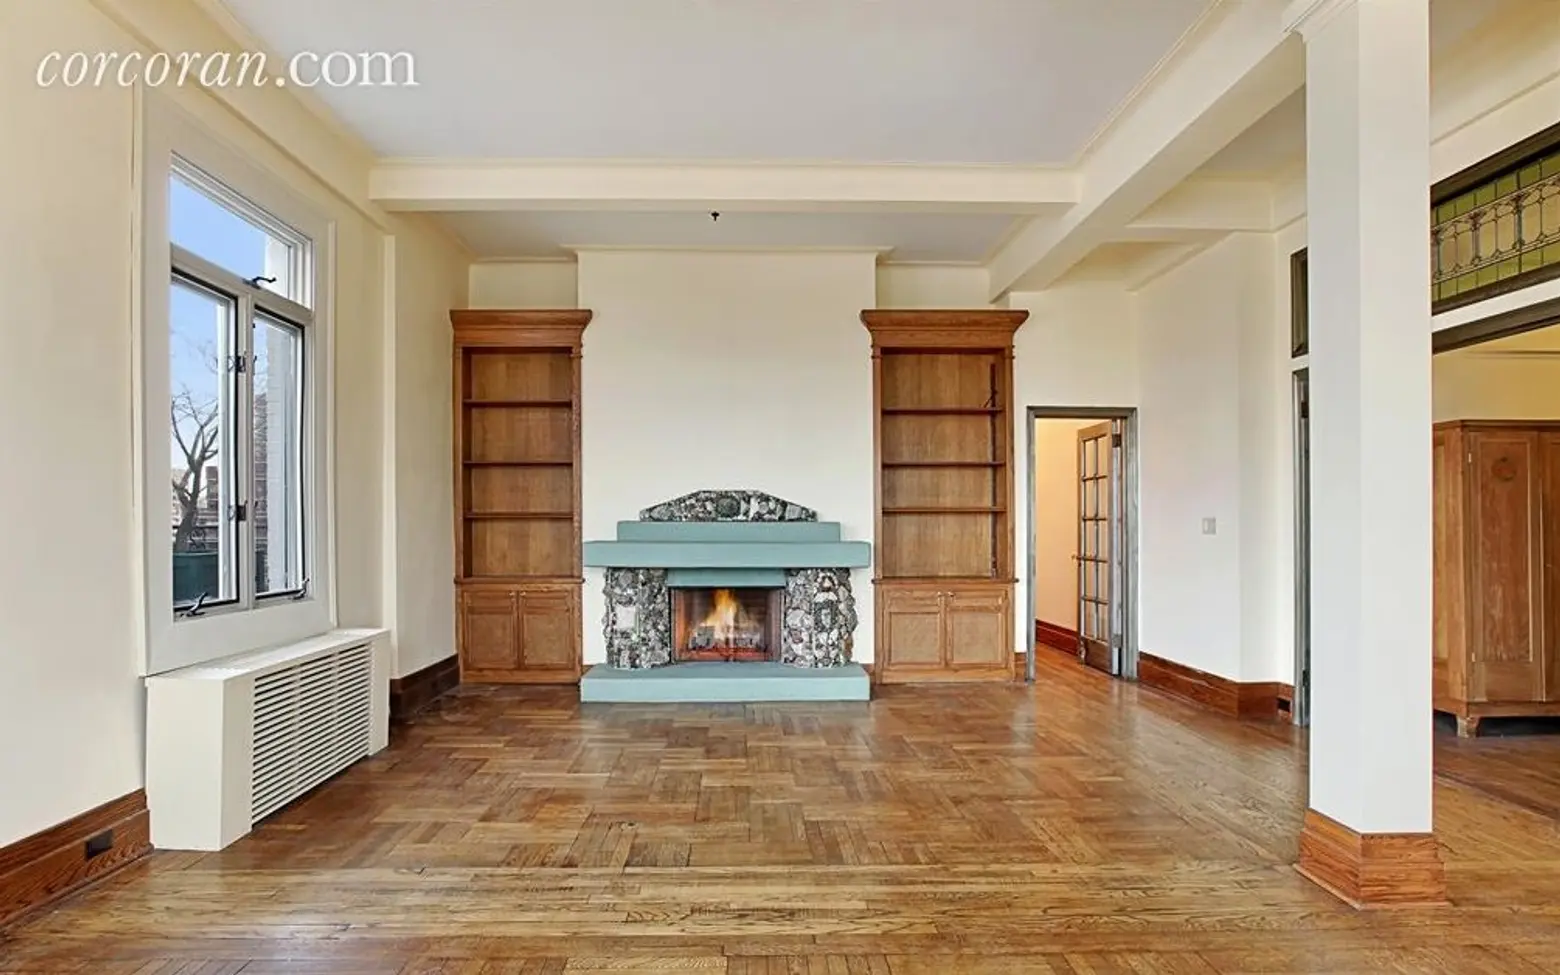 Penny Marshall Lists $5.5M UWS Penthouse With Terrace, Views and a Fireplace in the Bathroom